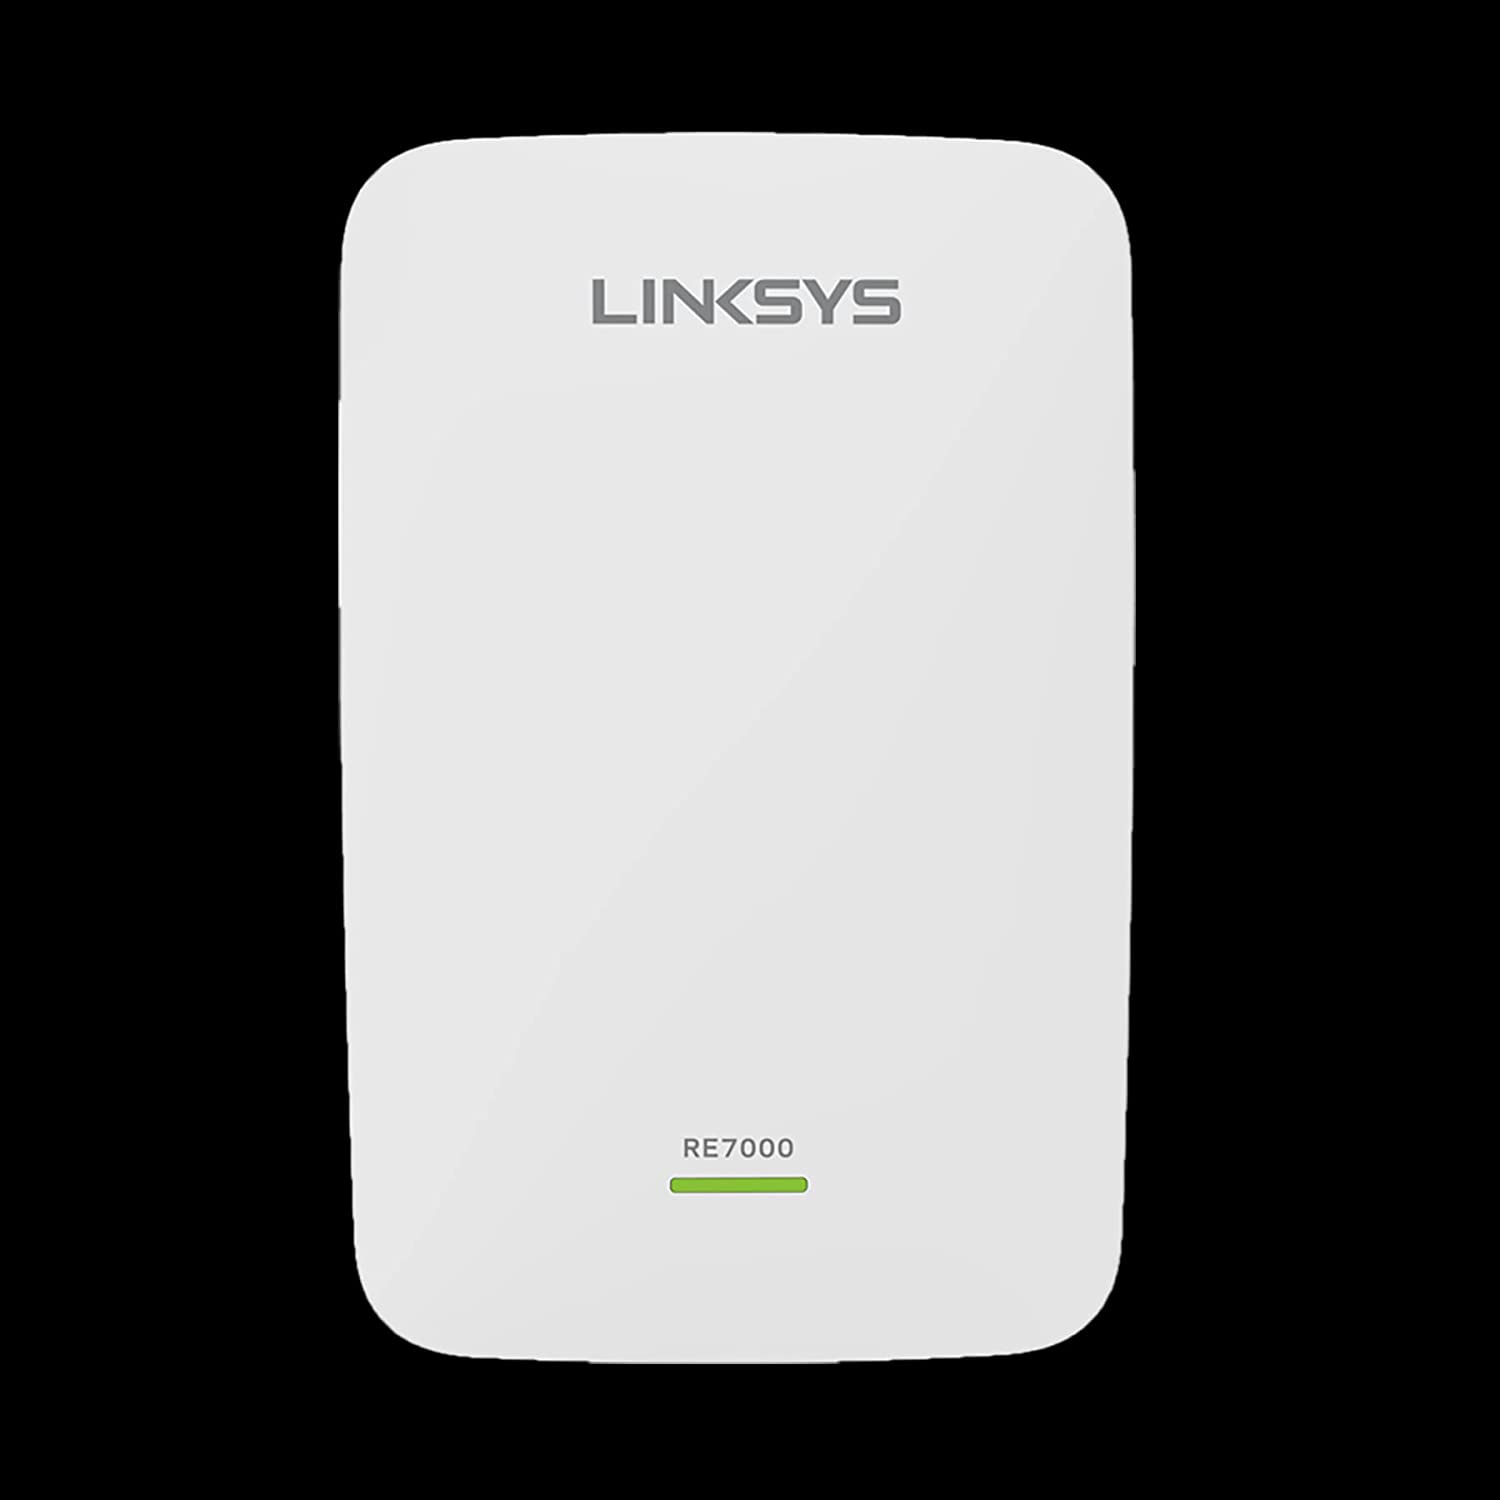 Linksys RE7000 AC1900 Gigabit Range Extender/Wi-Fi Booster/Repeater MU-MIMO (Max Stream RE7000)